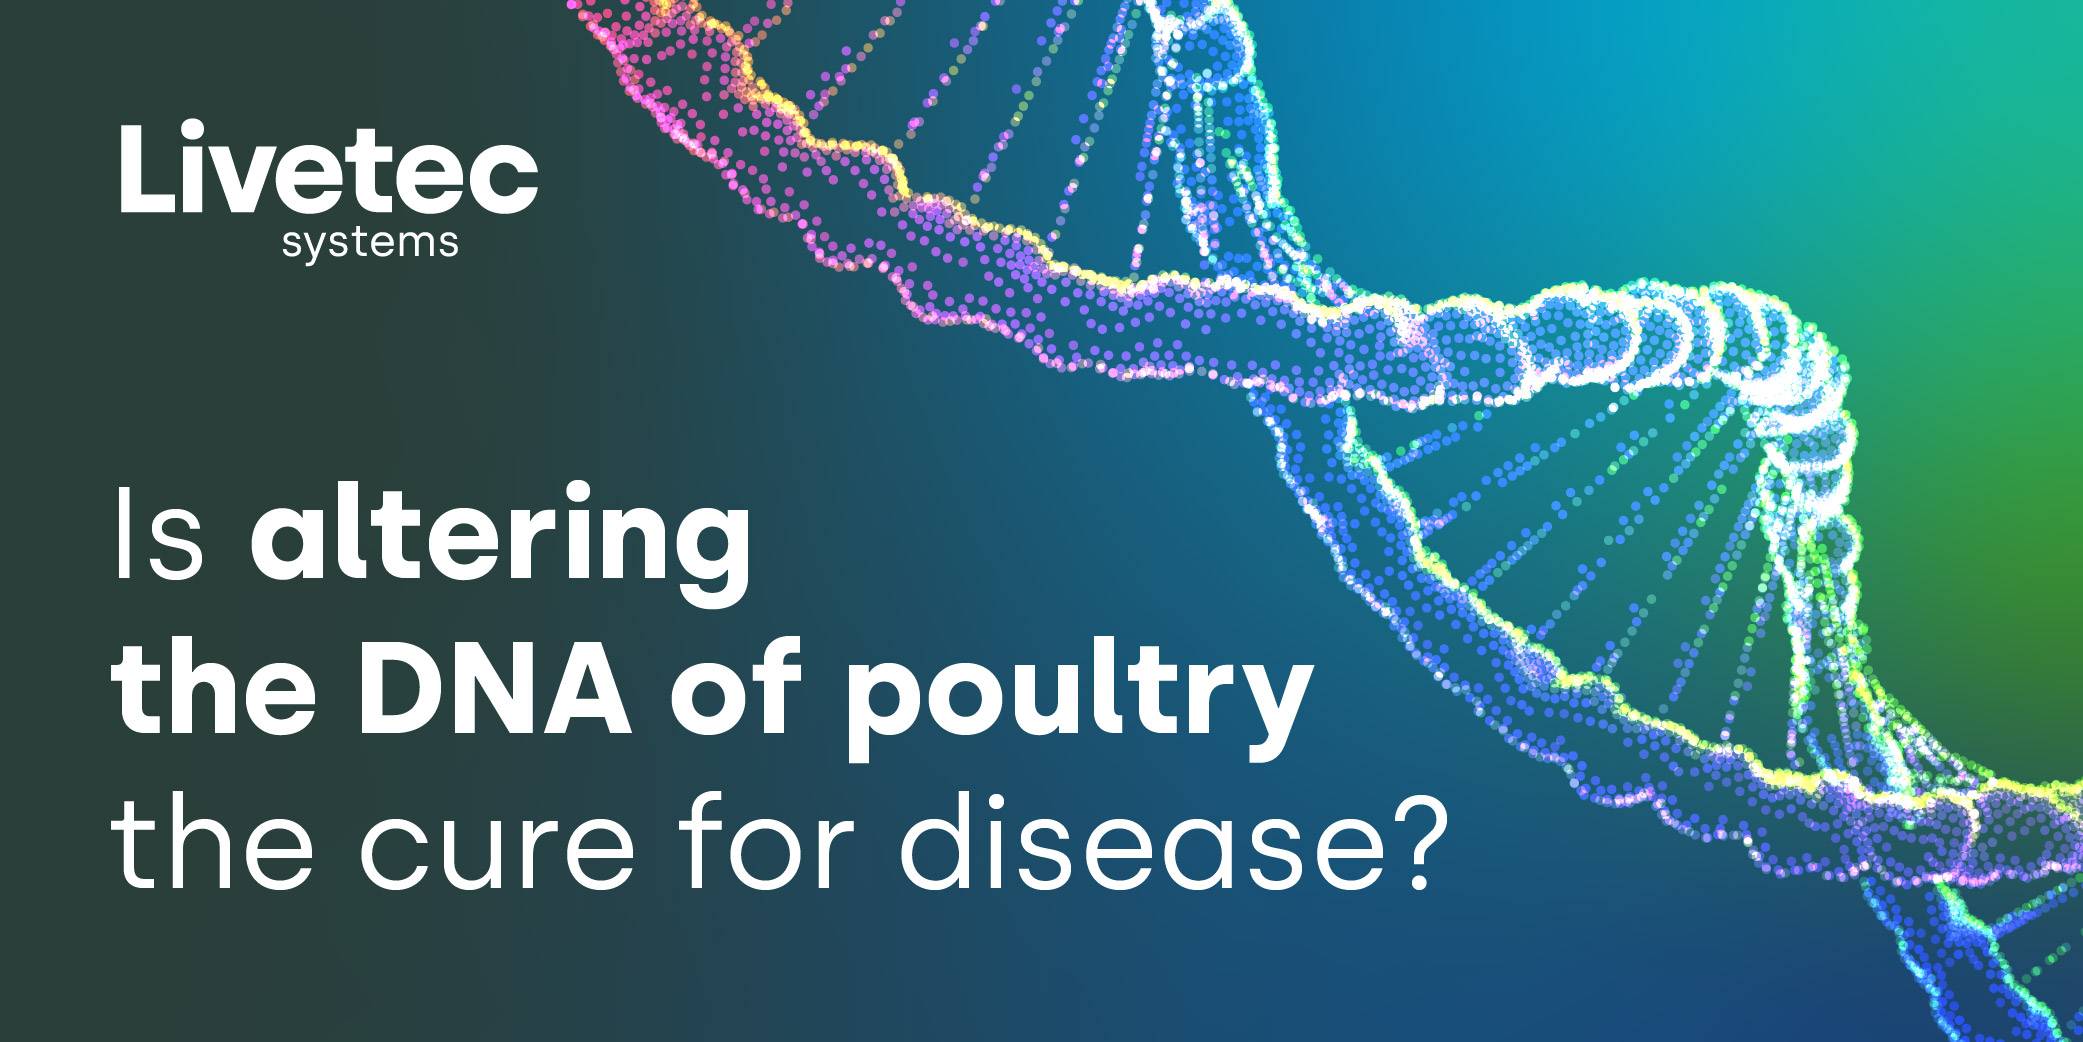 s altering the DNA of poultry the cure for disease? blog graphic